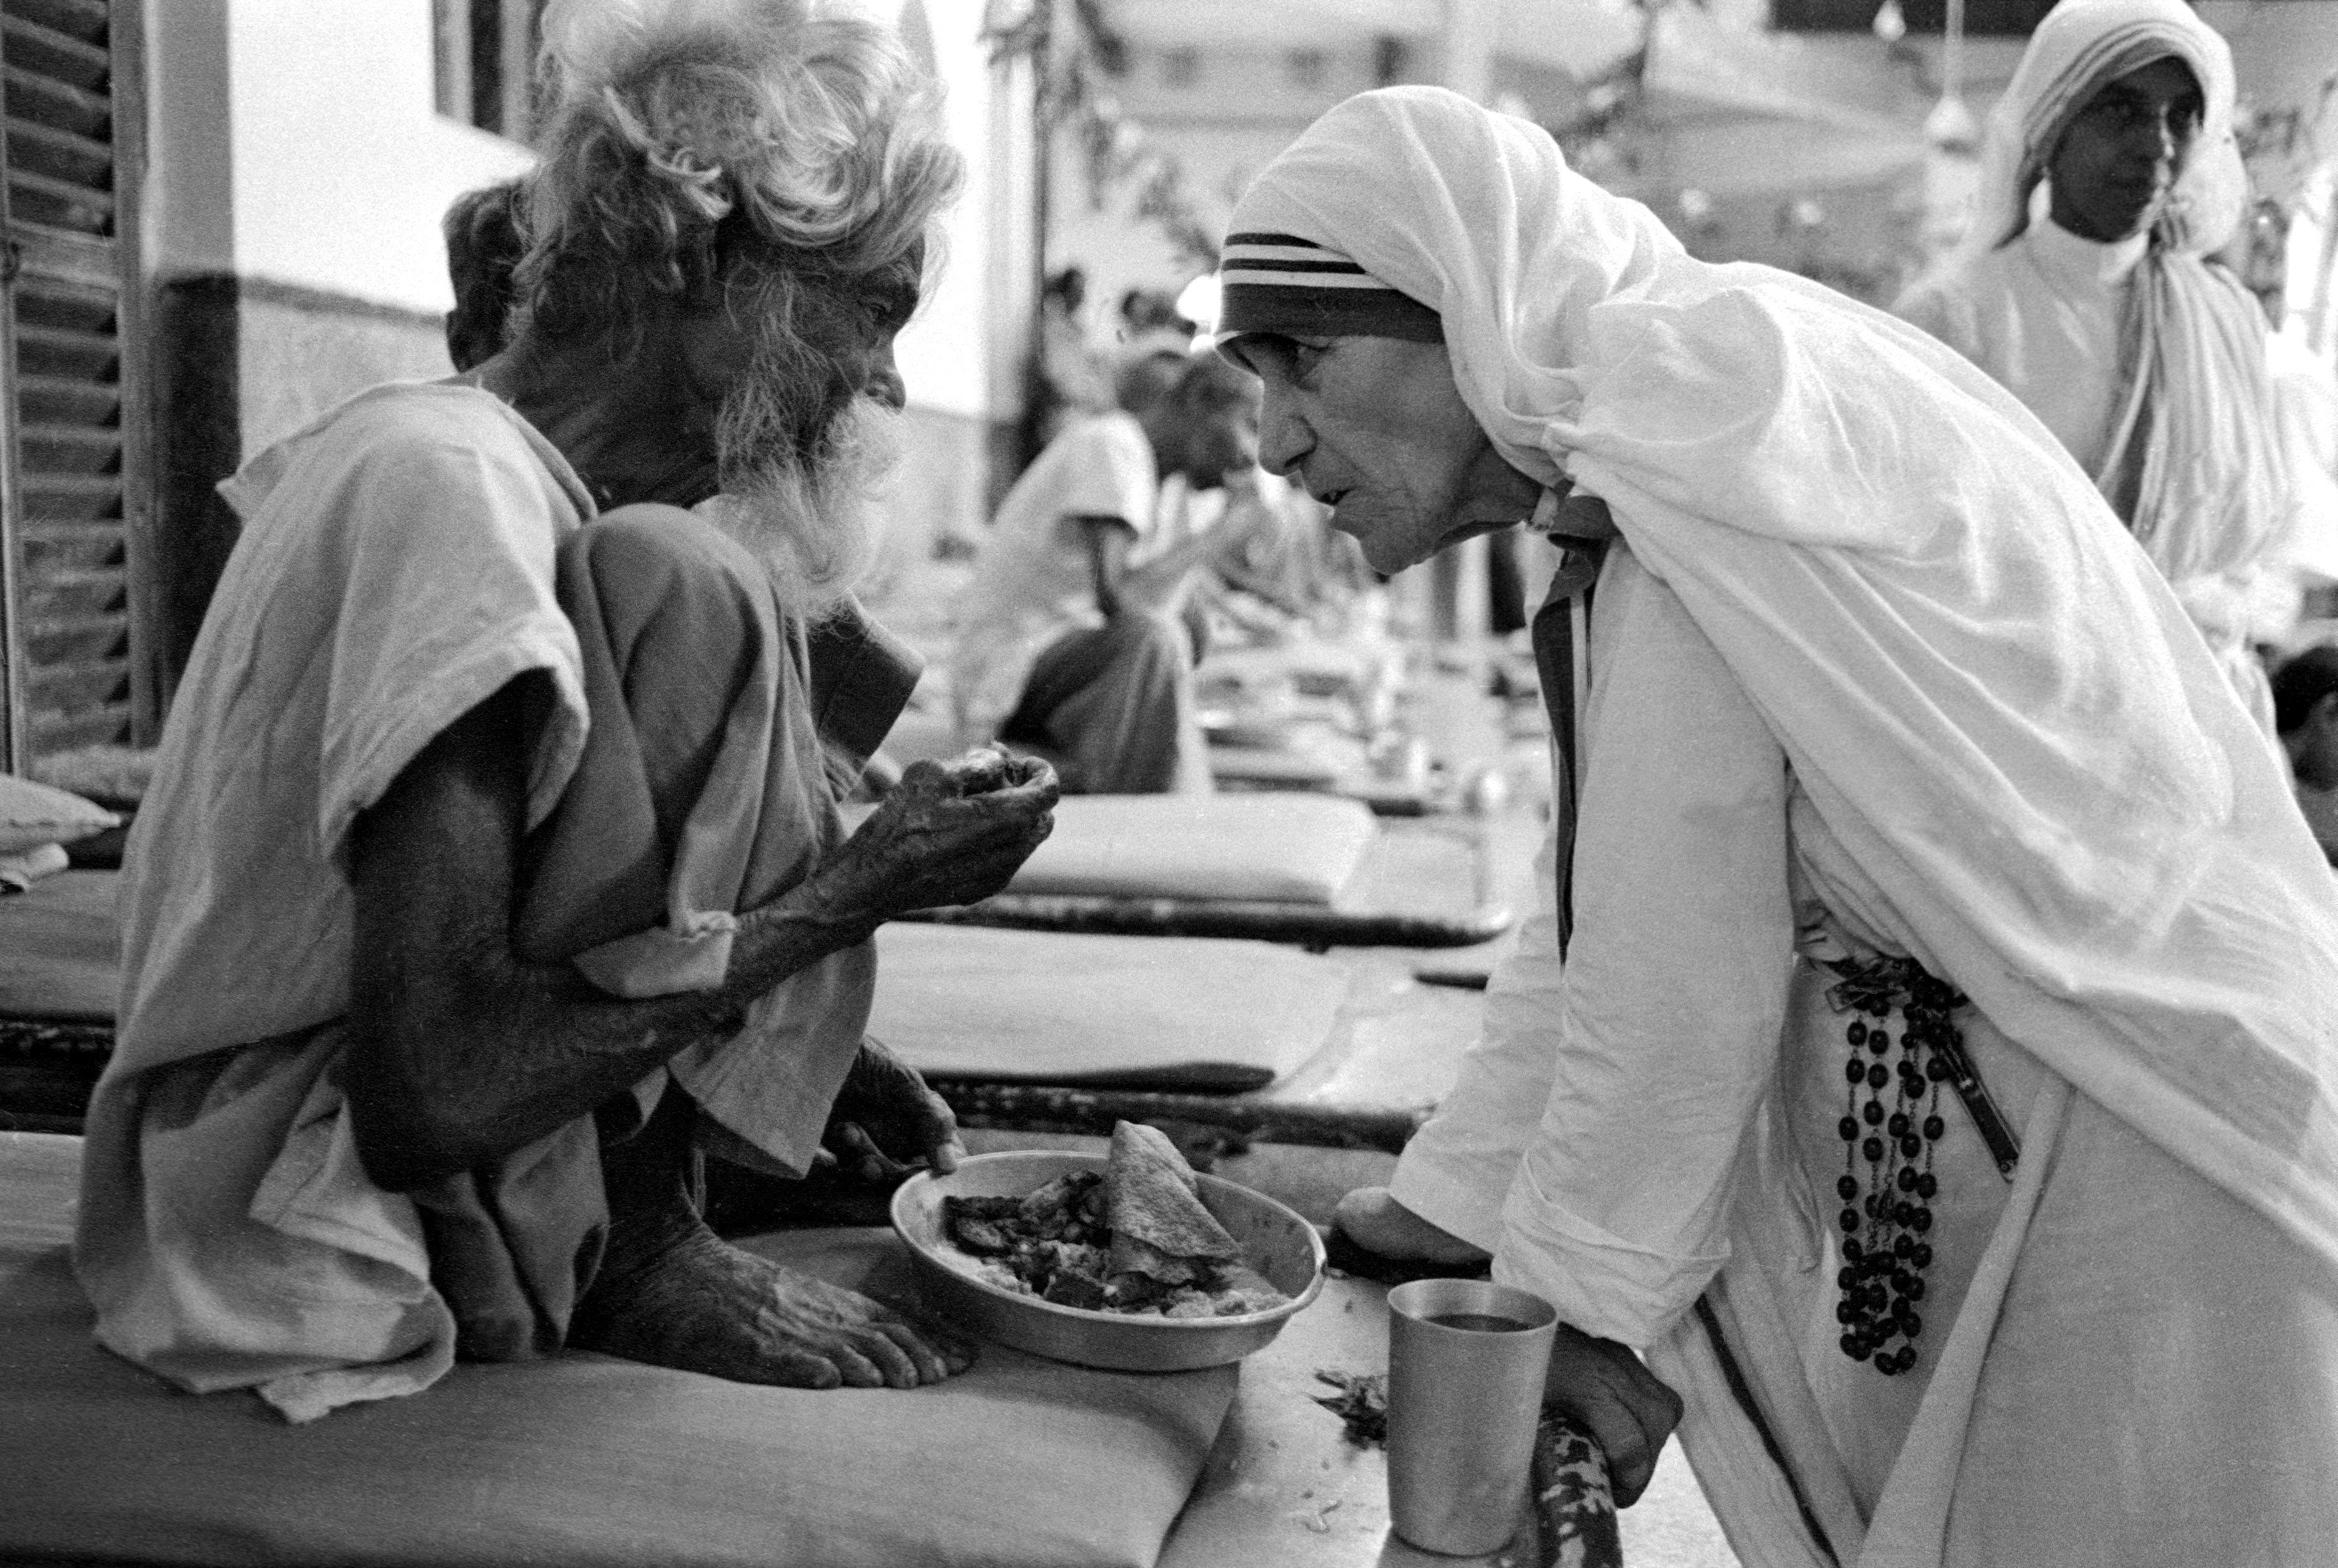 Mother Teresa and the poor in Calcutta, India in October, 1979.